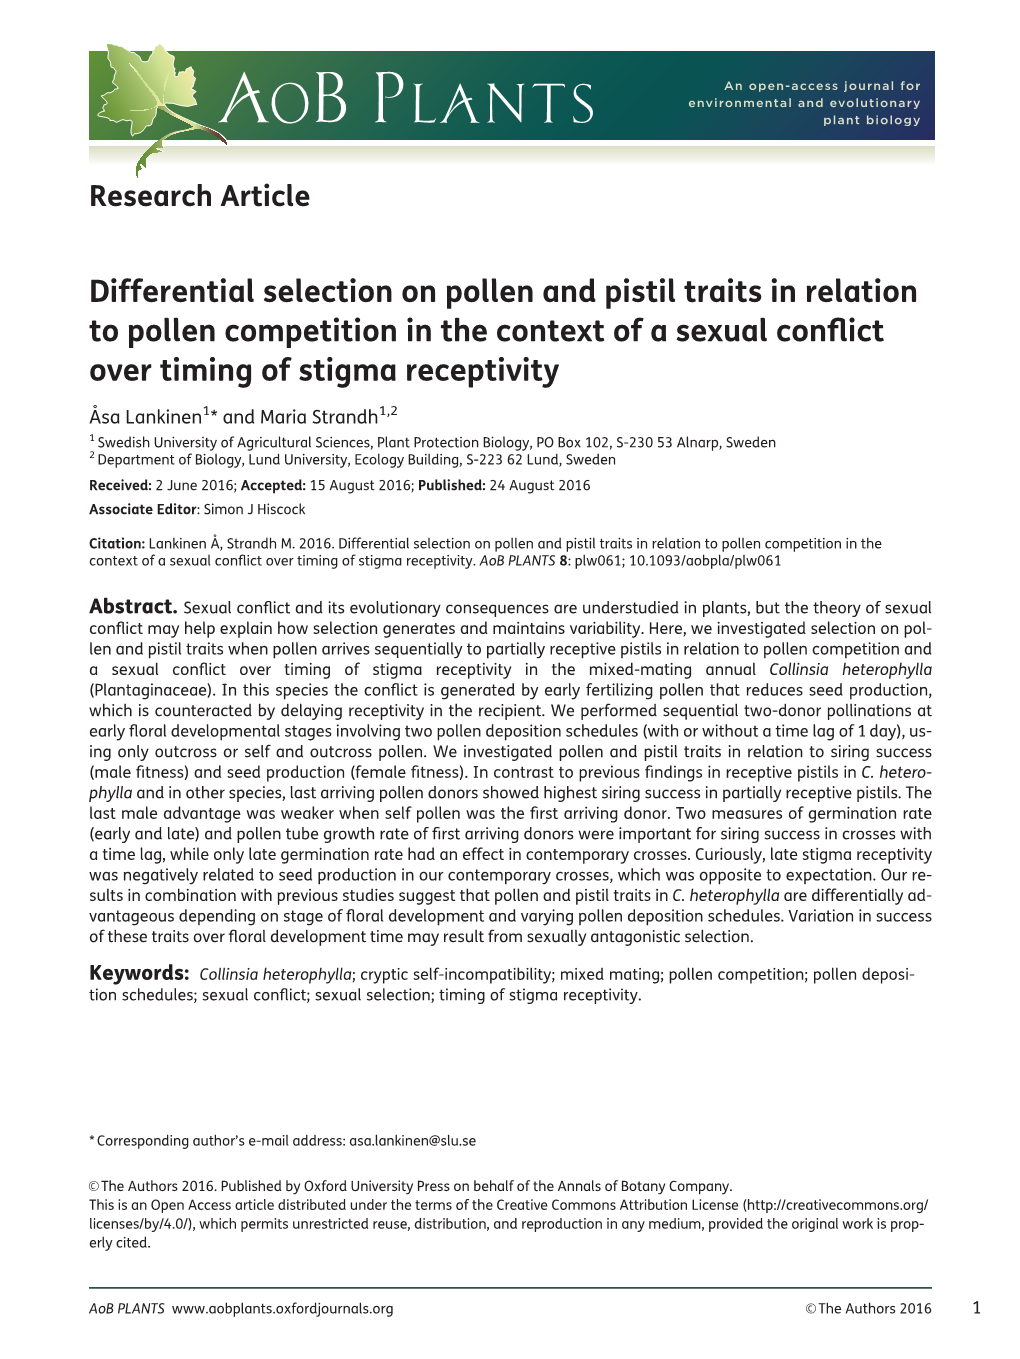 Differential Selection on Pollen and Pistil Traits in Relation to Pollen Competition in the Context of a Sexual Conflict Over Ti